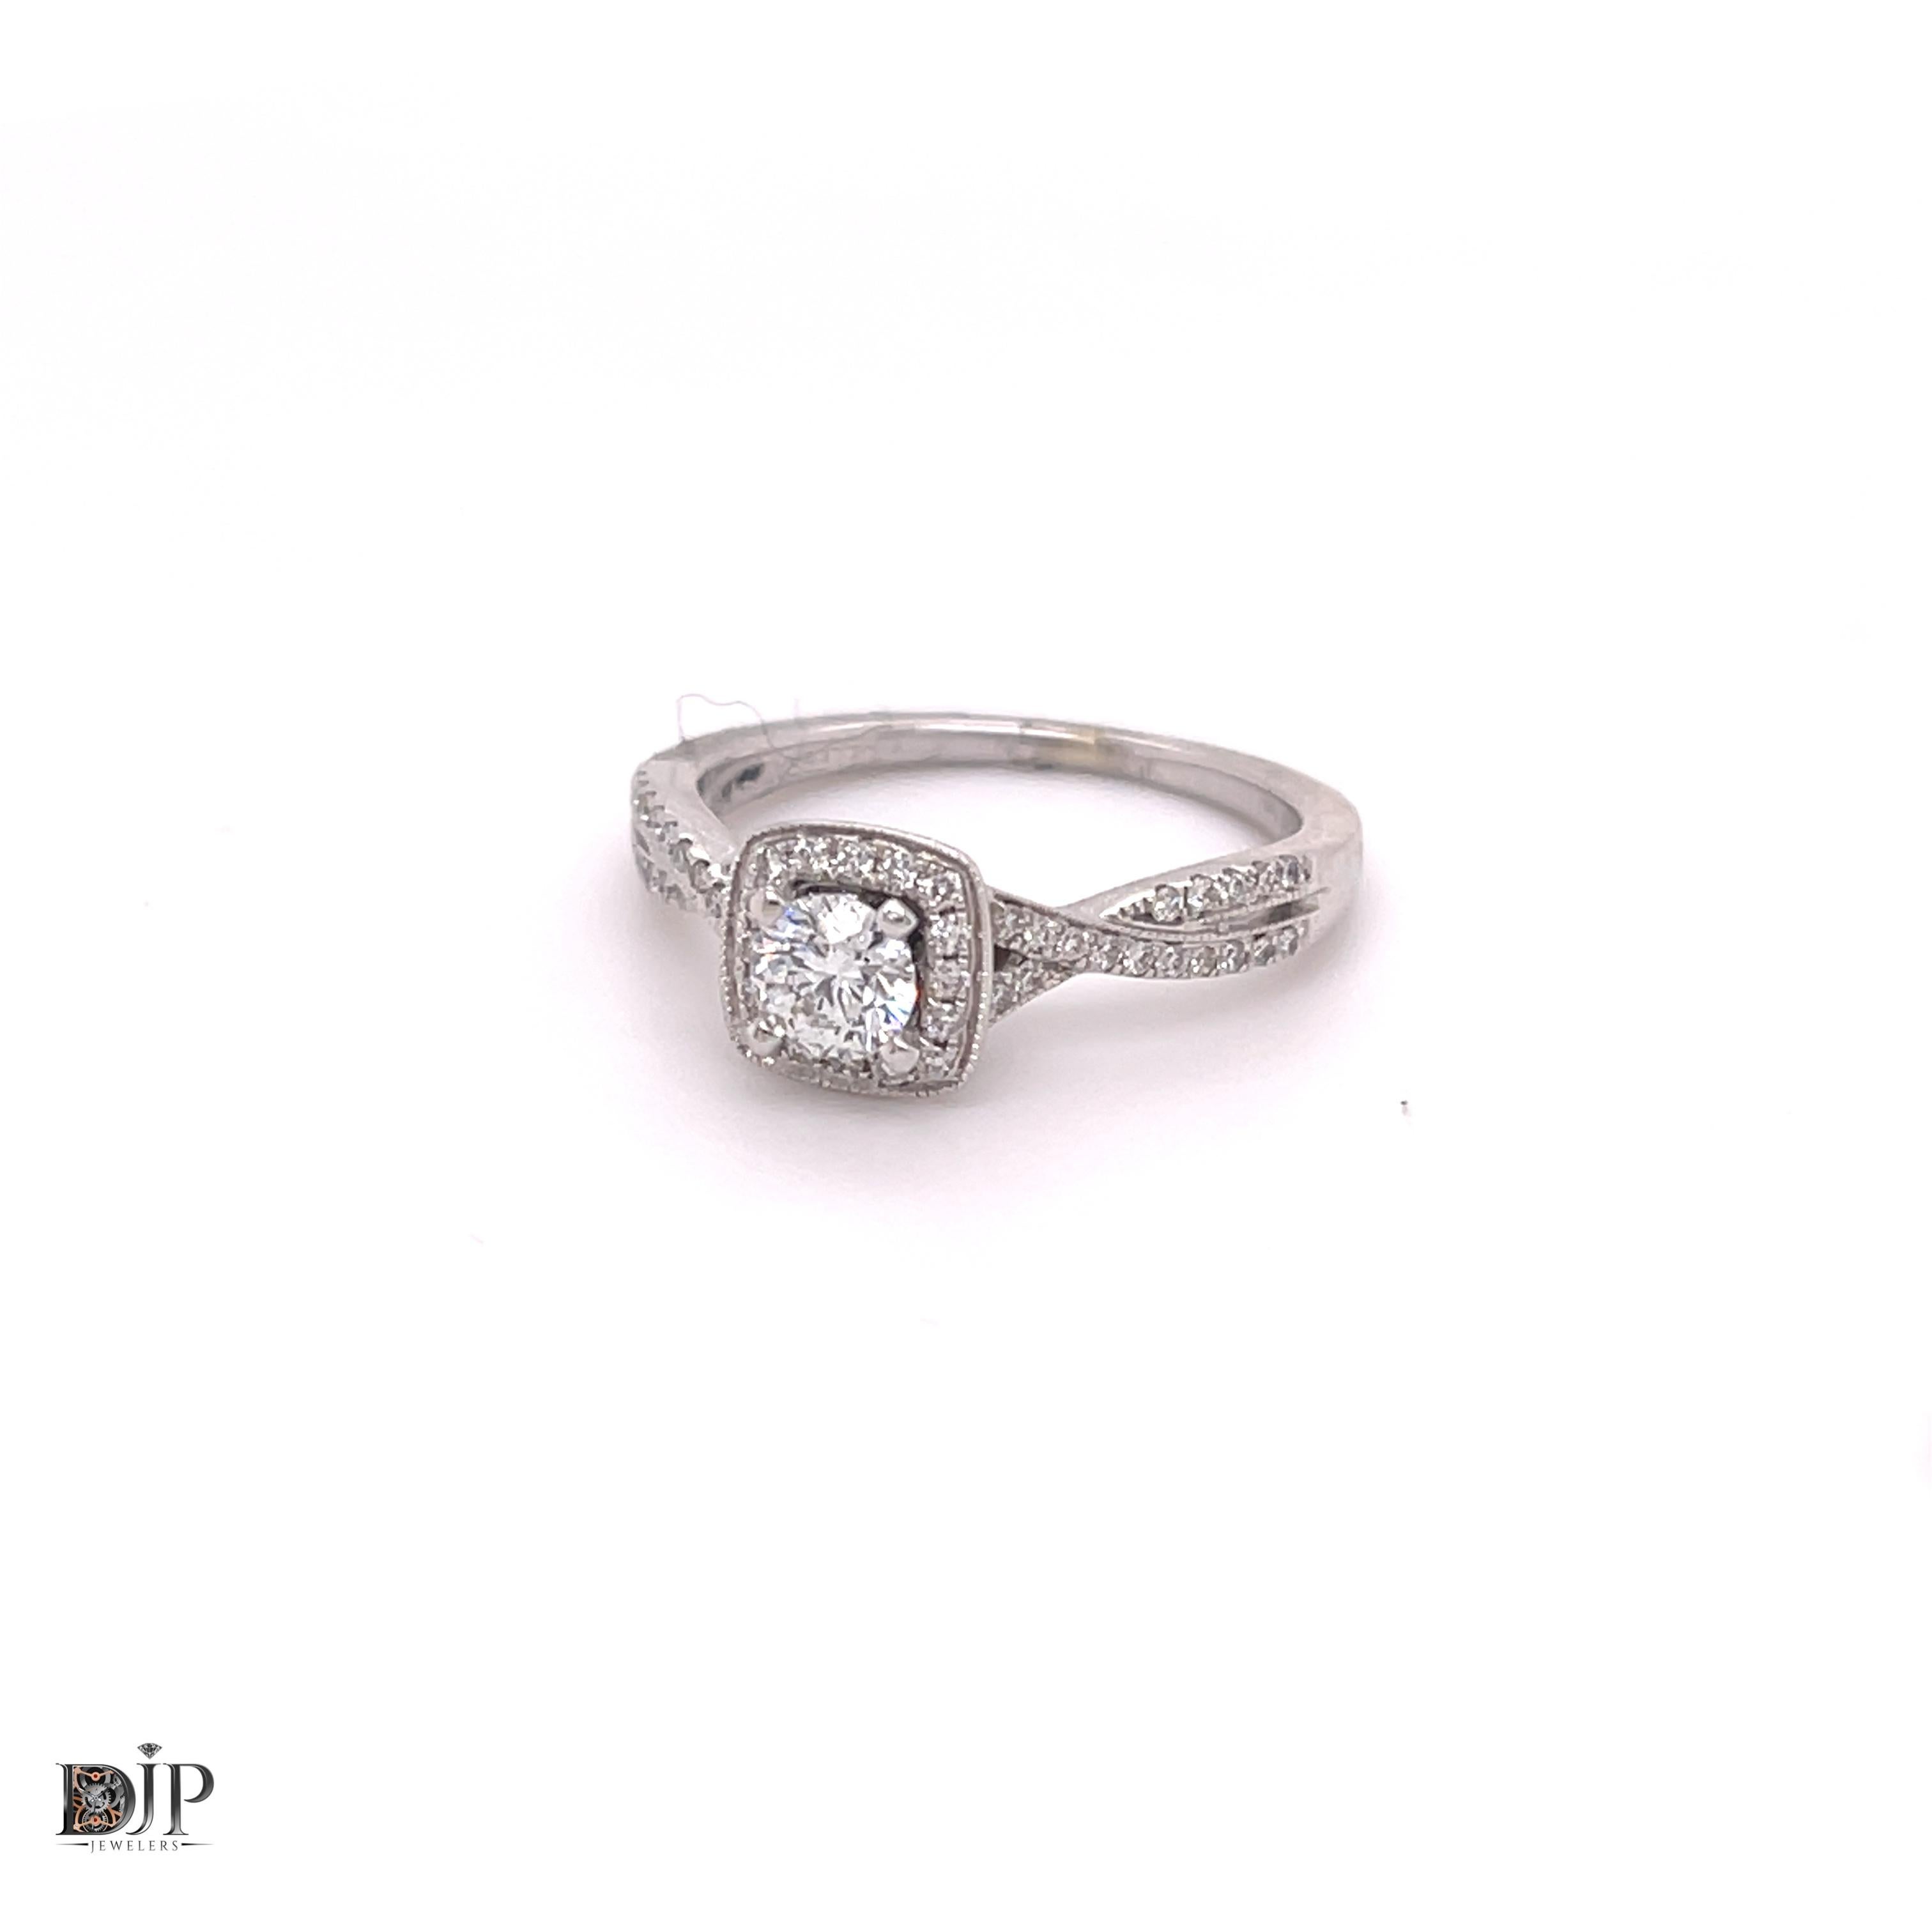 Gender: Ladies
Size: 8.25 US
Total Weight: 3.4 grams
Purity: 14K White Gold
Shank type: Soft Square
Condition: Pre-owned in excellent condition. Quality and Durability was checked by professional jewelers.

4-Prong Set in 14 Karat White Gold